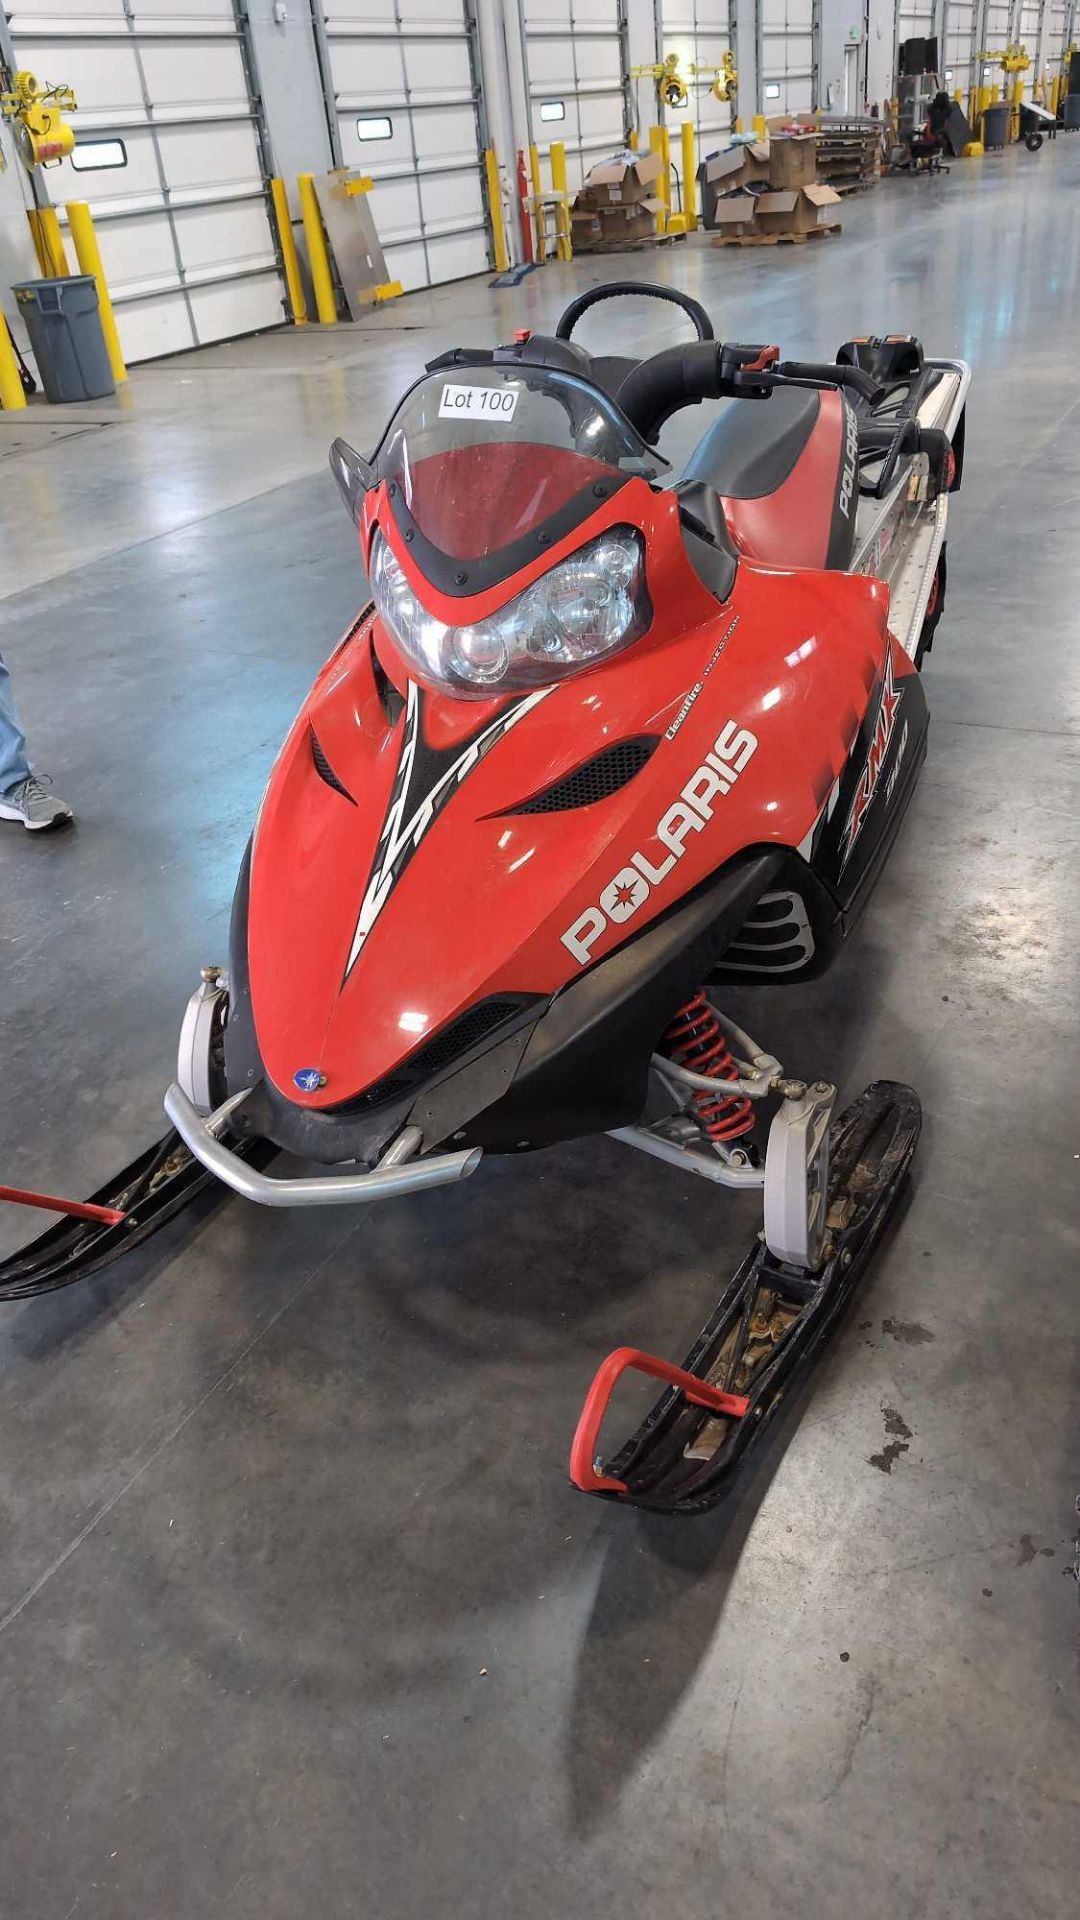 2006 Polaris 900 RMK Snowmobile, w/ 4,119 Miles runs and drives title in hand $195 Doc Fee - Image 6 of 6